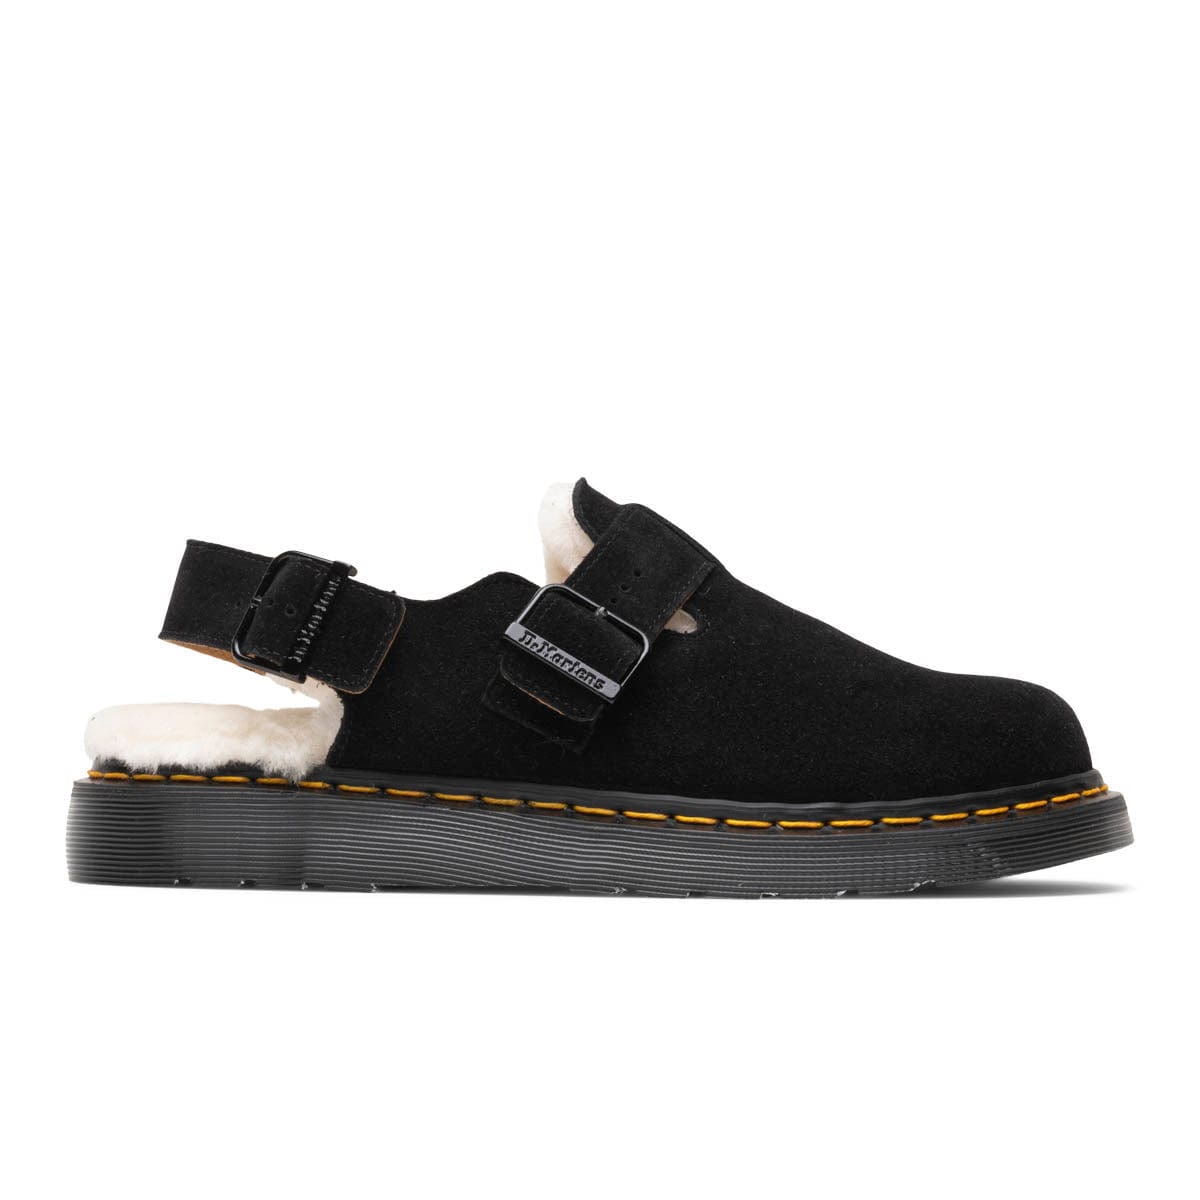 Dr. Martens Casual JORGE MADE IN ENGLAND SHEARLING MULE